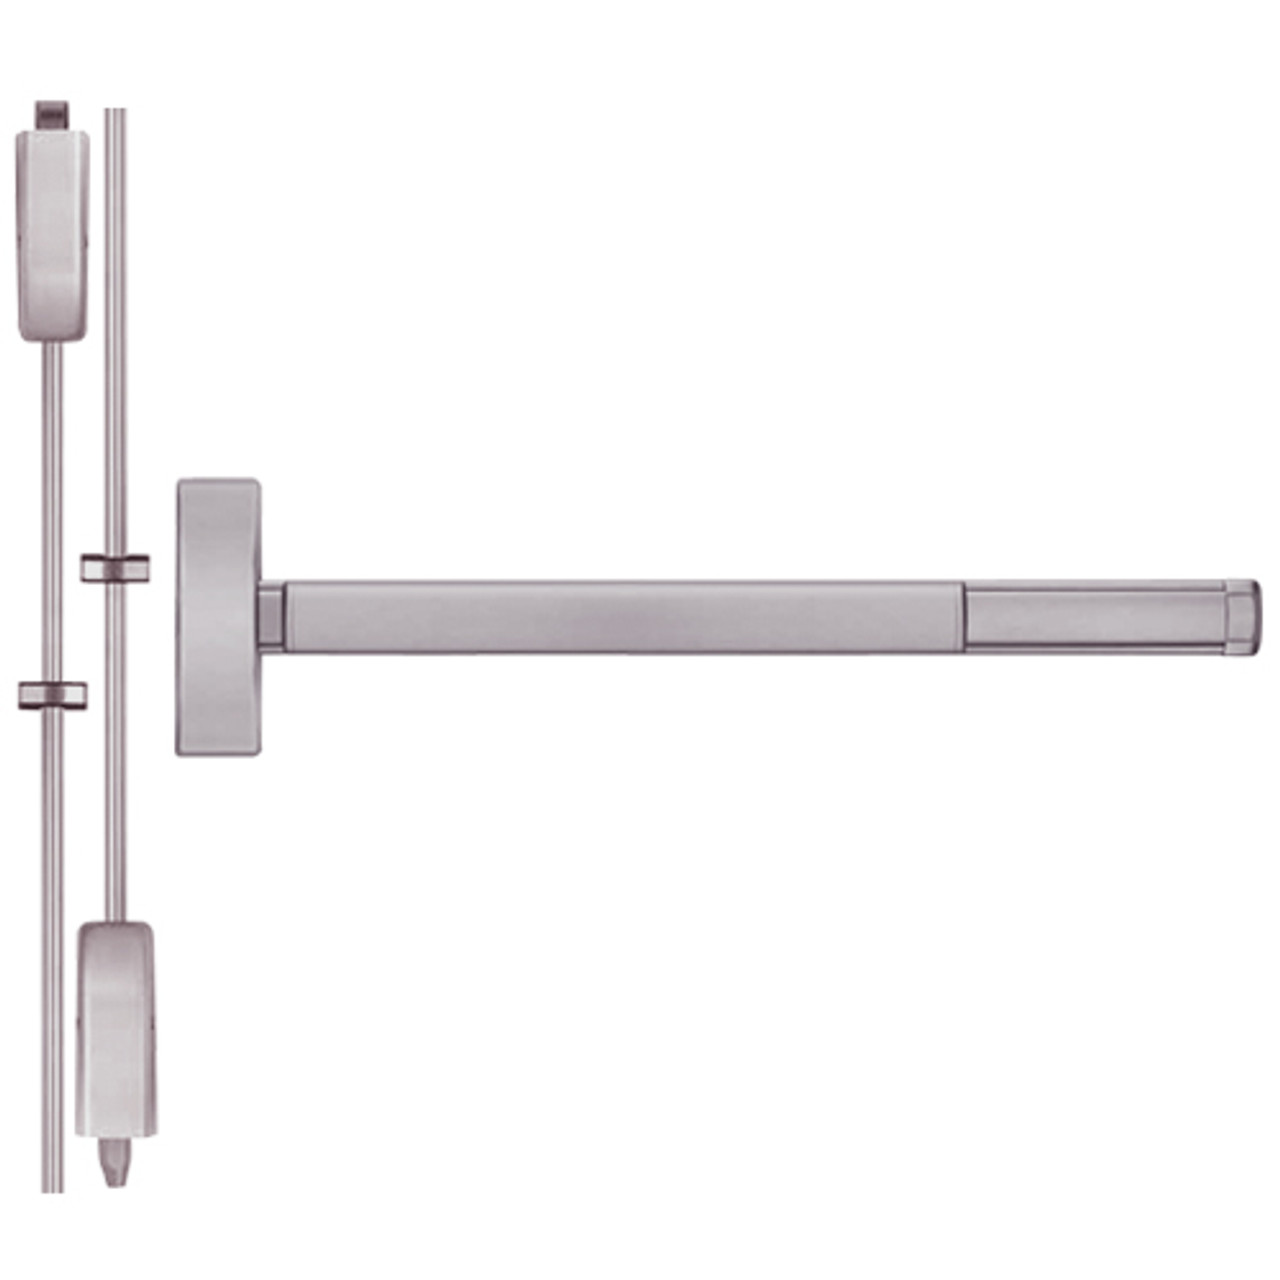 TSFL2214-630-48 PHI 2200 Series Apex Surface Vertical Rod Device with Touchbar Monitoring Switch Prepped for Lever-Knob Always Active in Satin Stainless Steel Finish